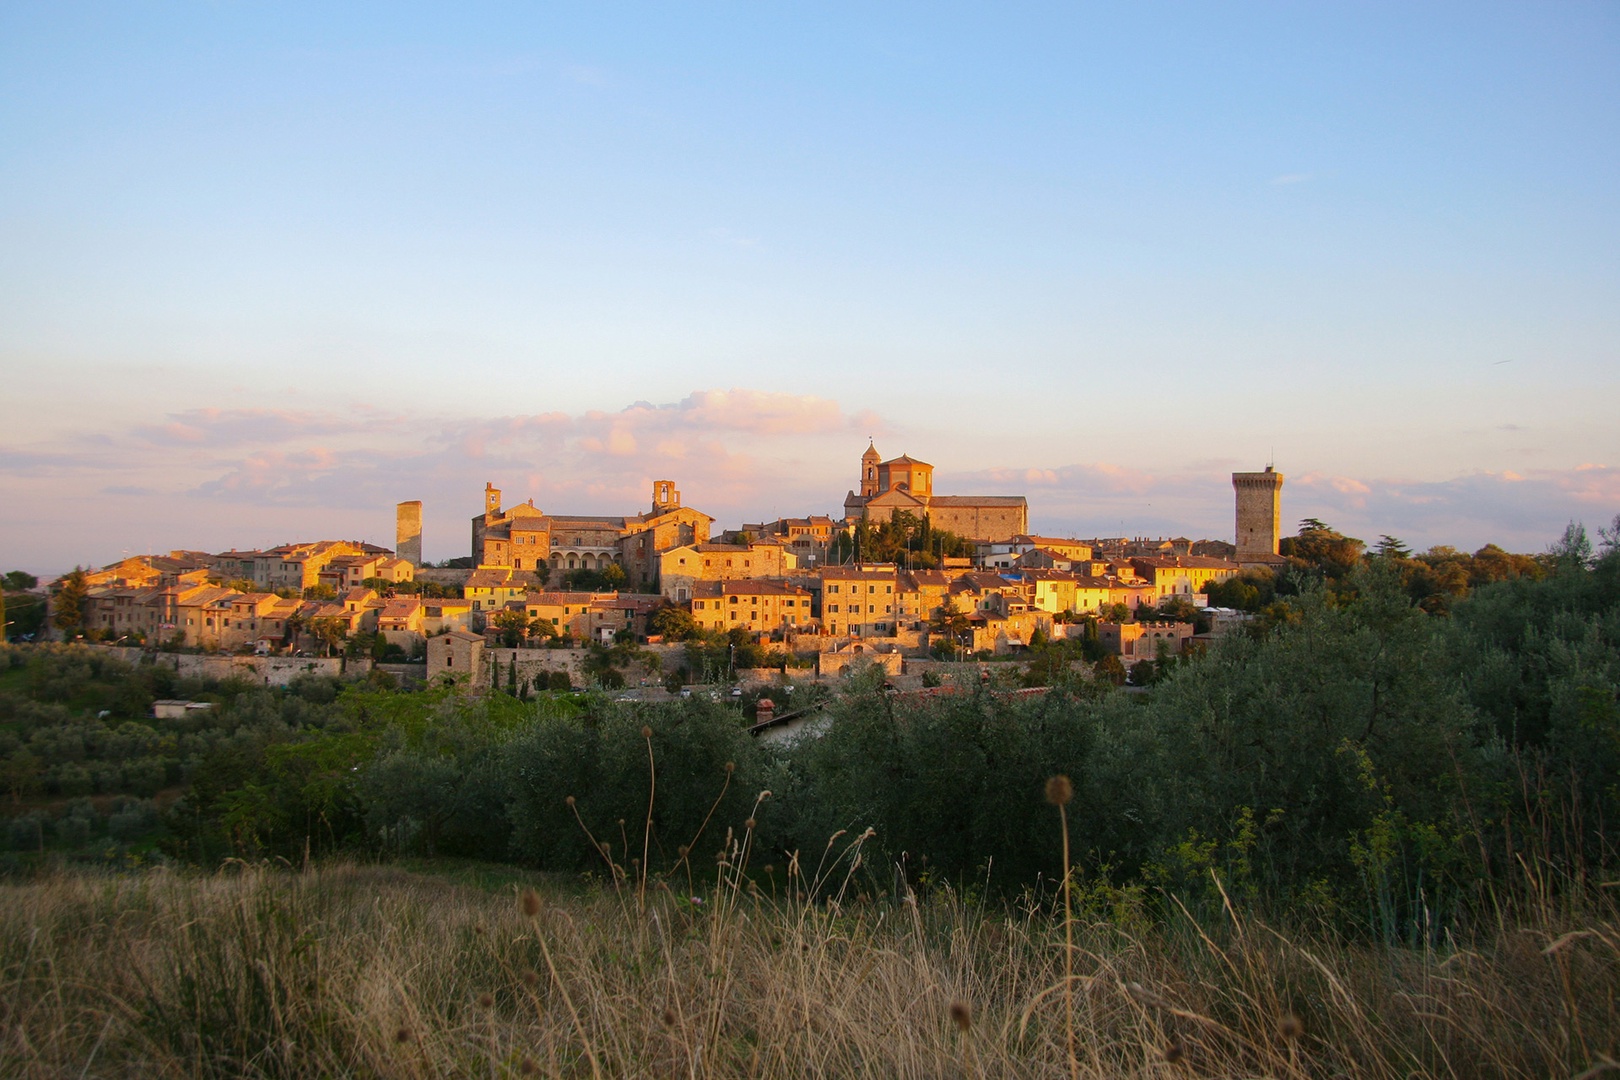 The villa is less than a mile from the remarkably preserved medieval hilltop town of Lucignano.